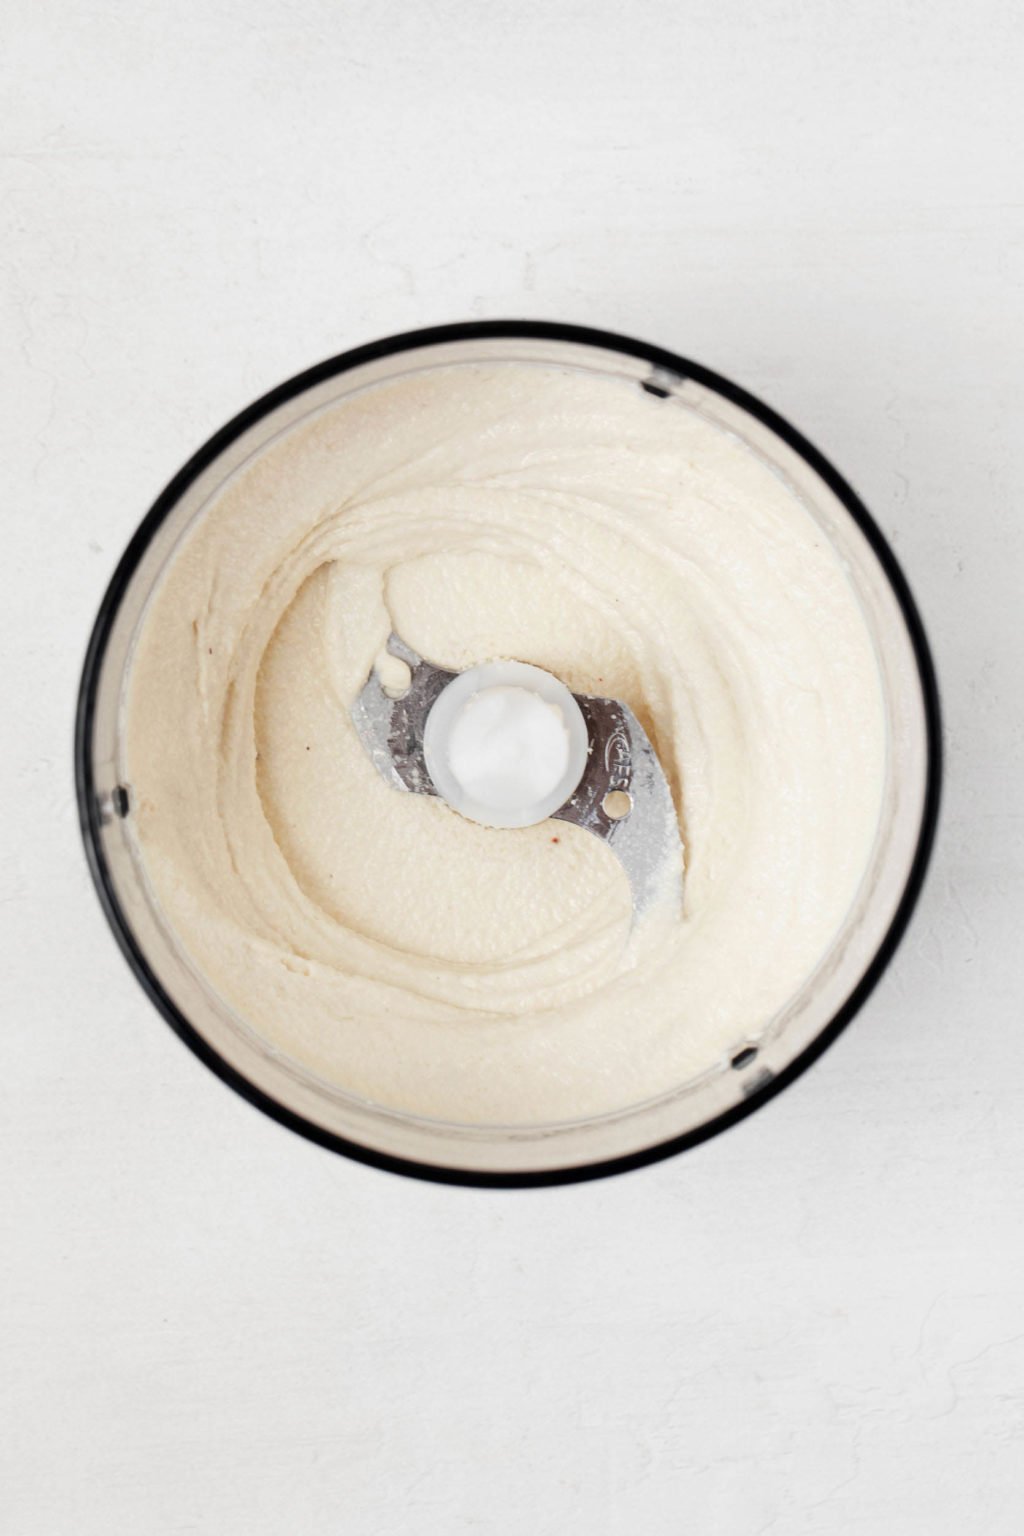 An overhead image of a food processor, which is filled with a creamy white mixture.